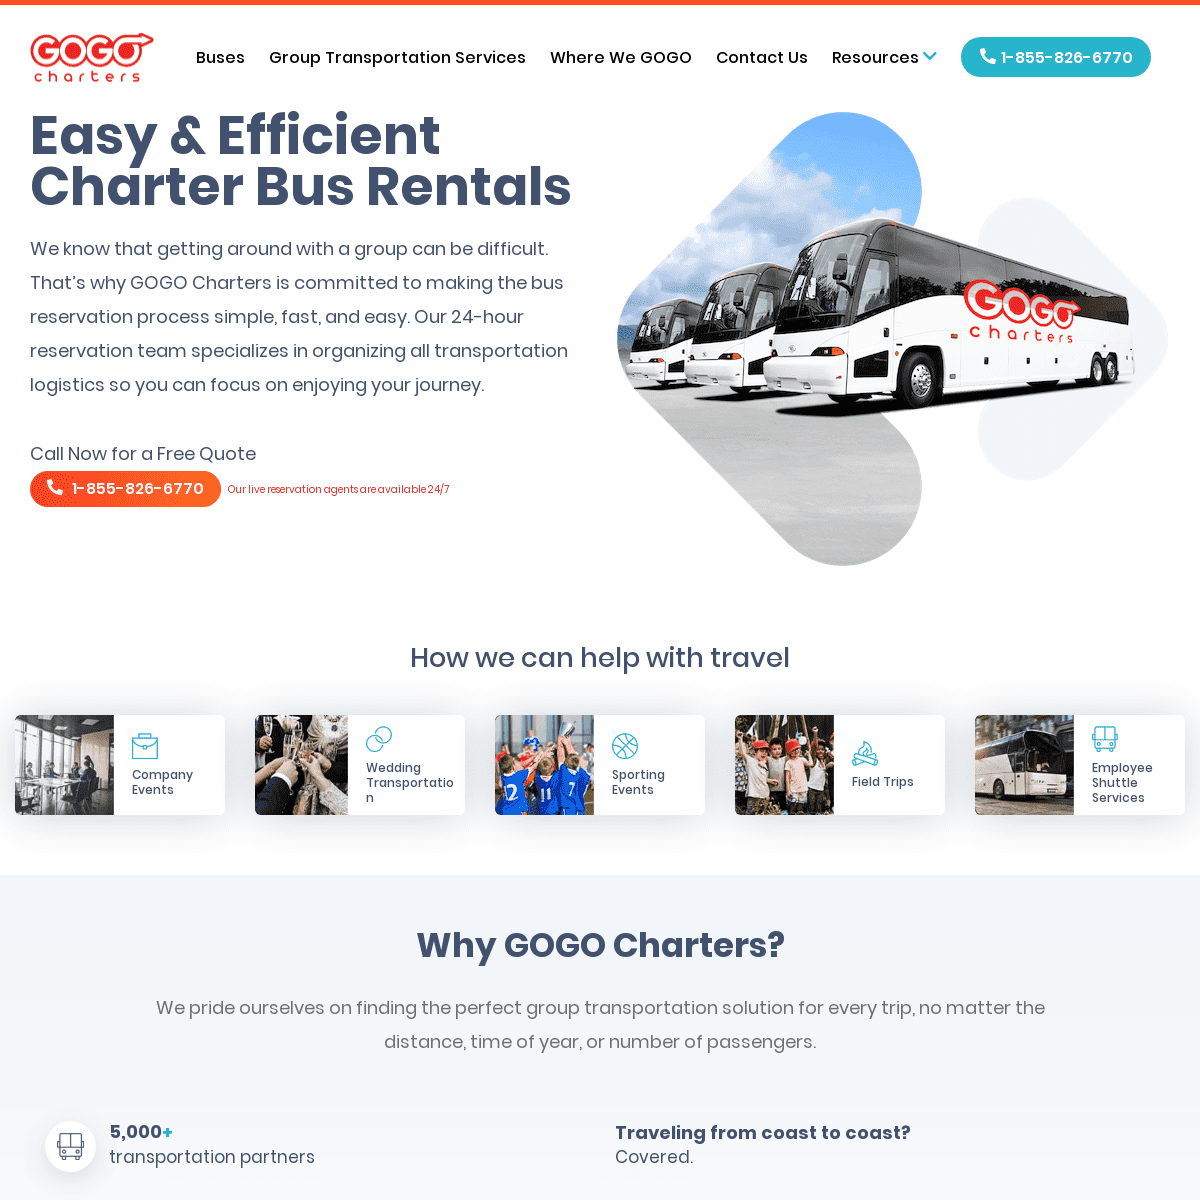 A complete backup of https://gogocharters.com